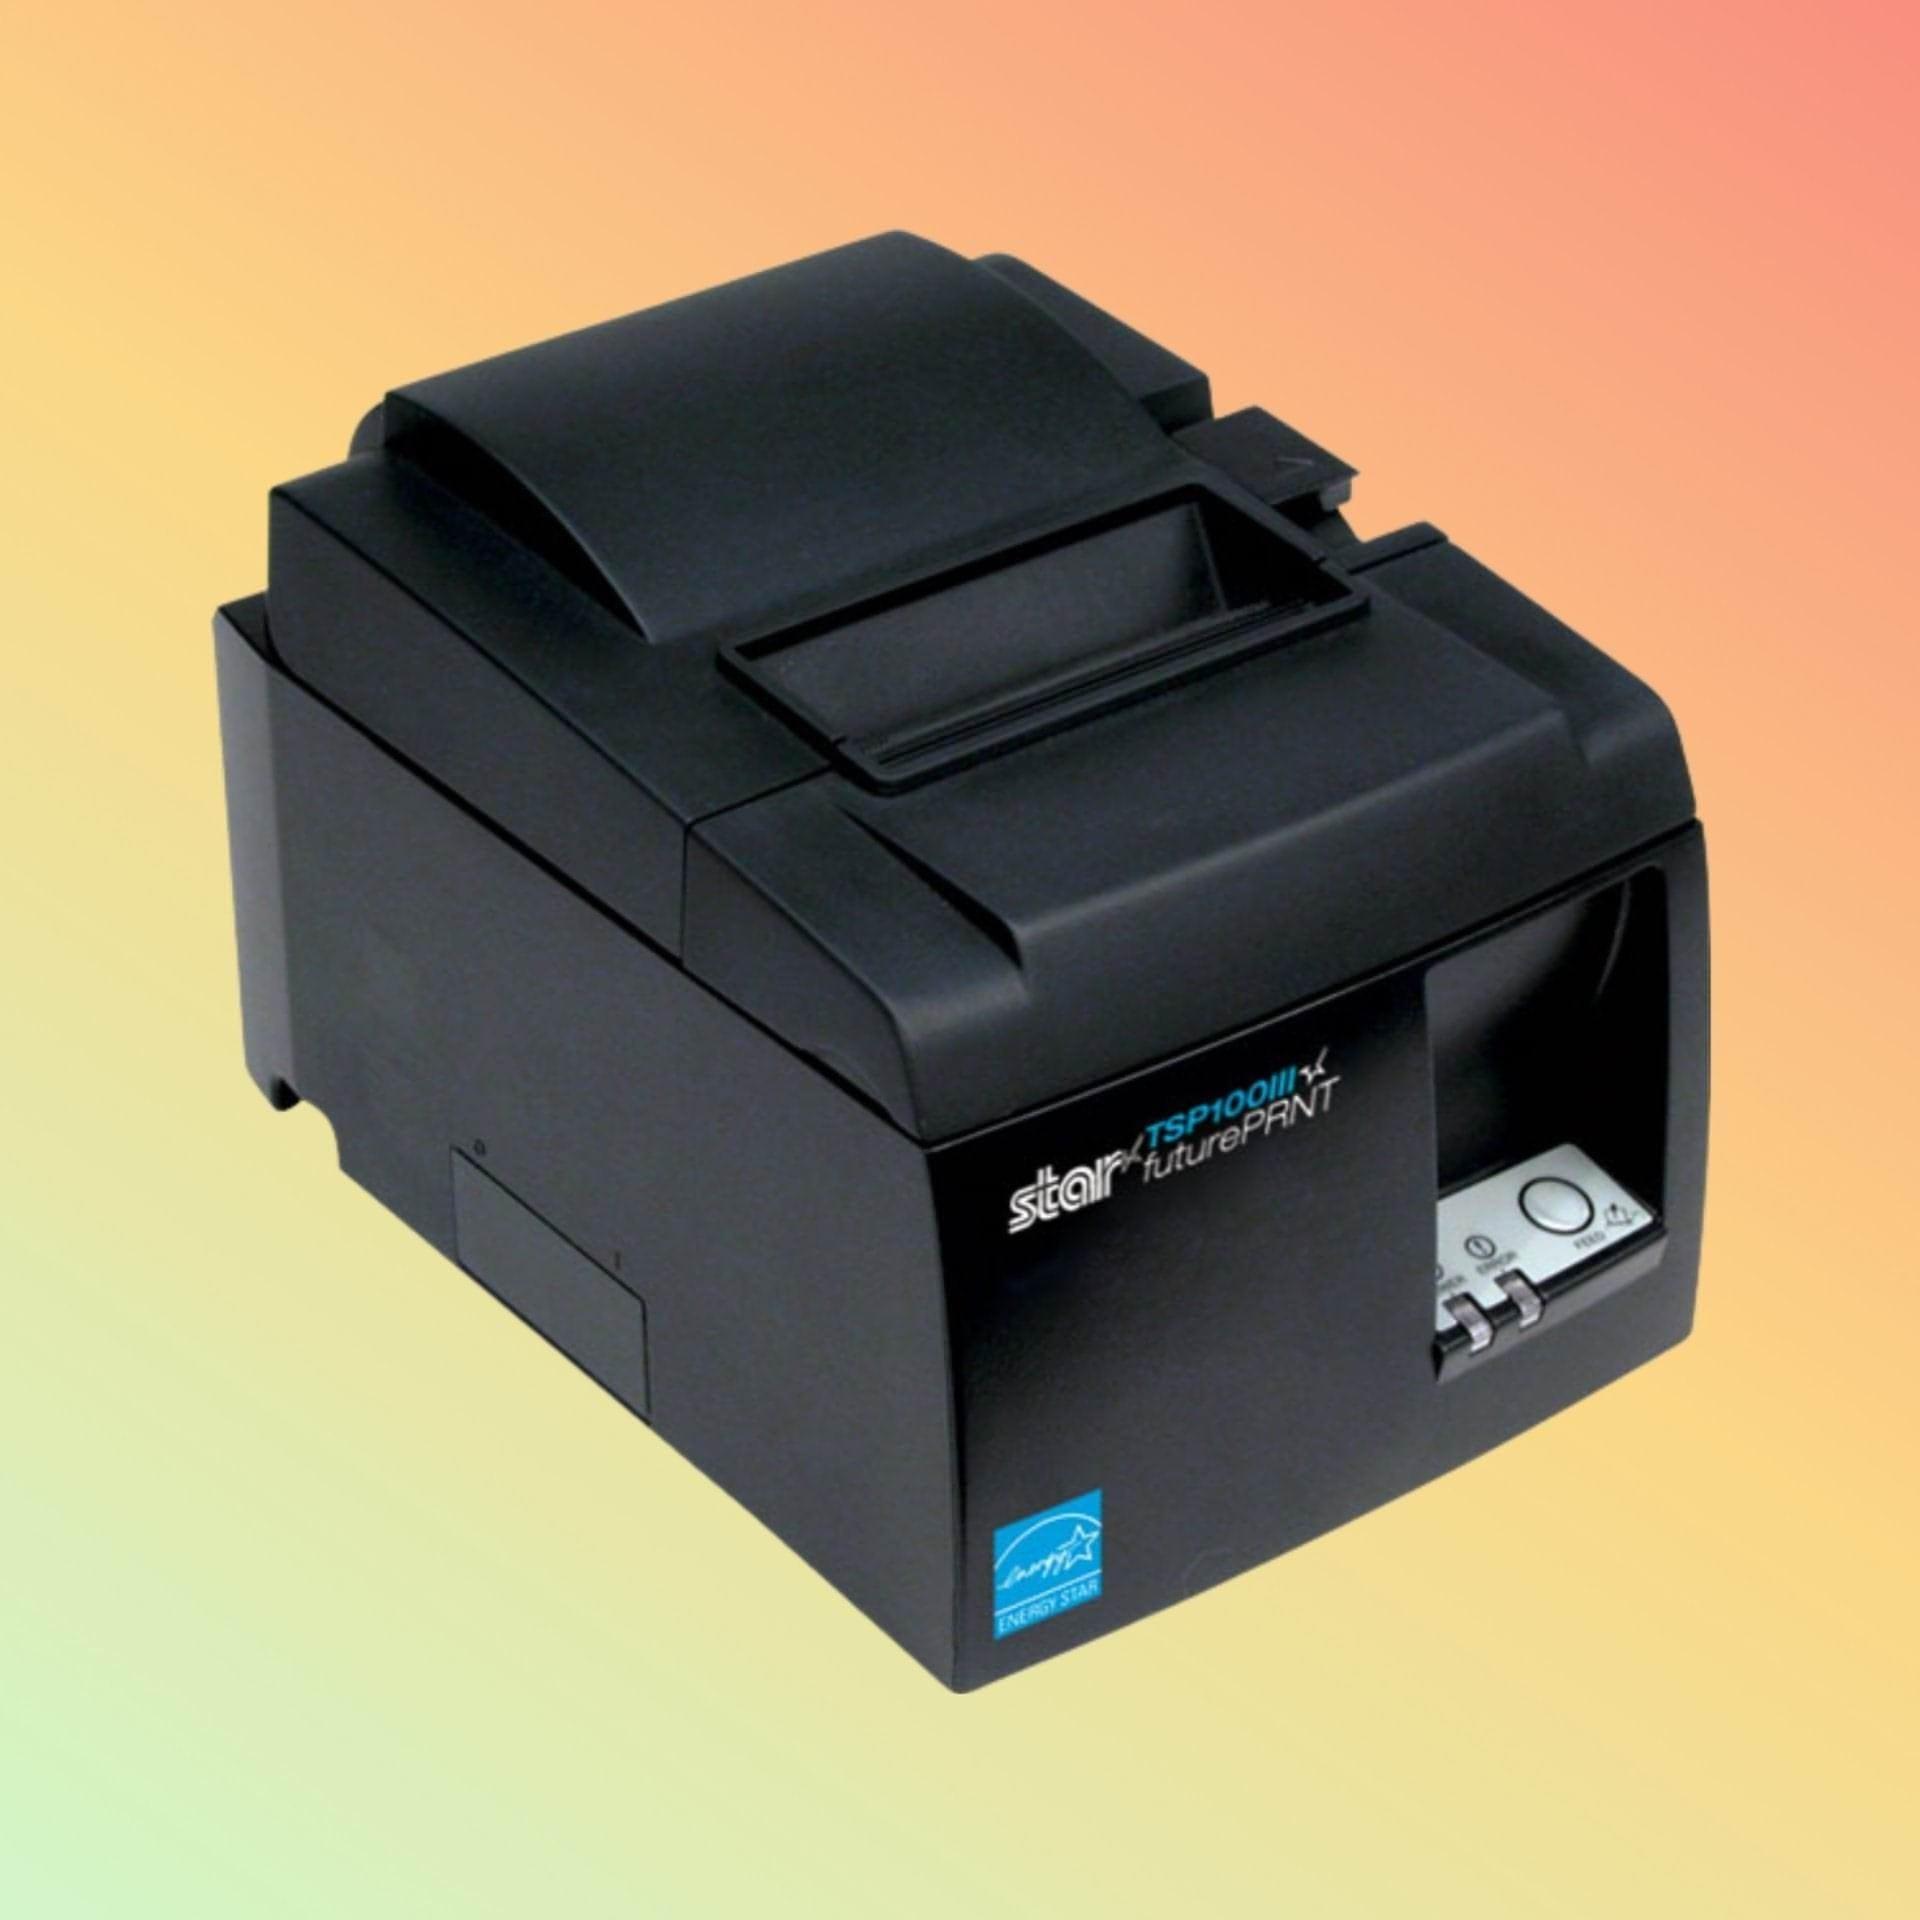 neotech.ae thermal Receipt Printer TSP143 Thermal Receipt Printer - Fast and Reliable"